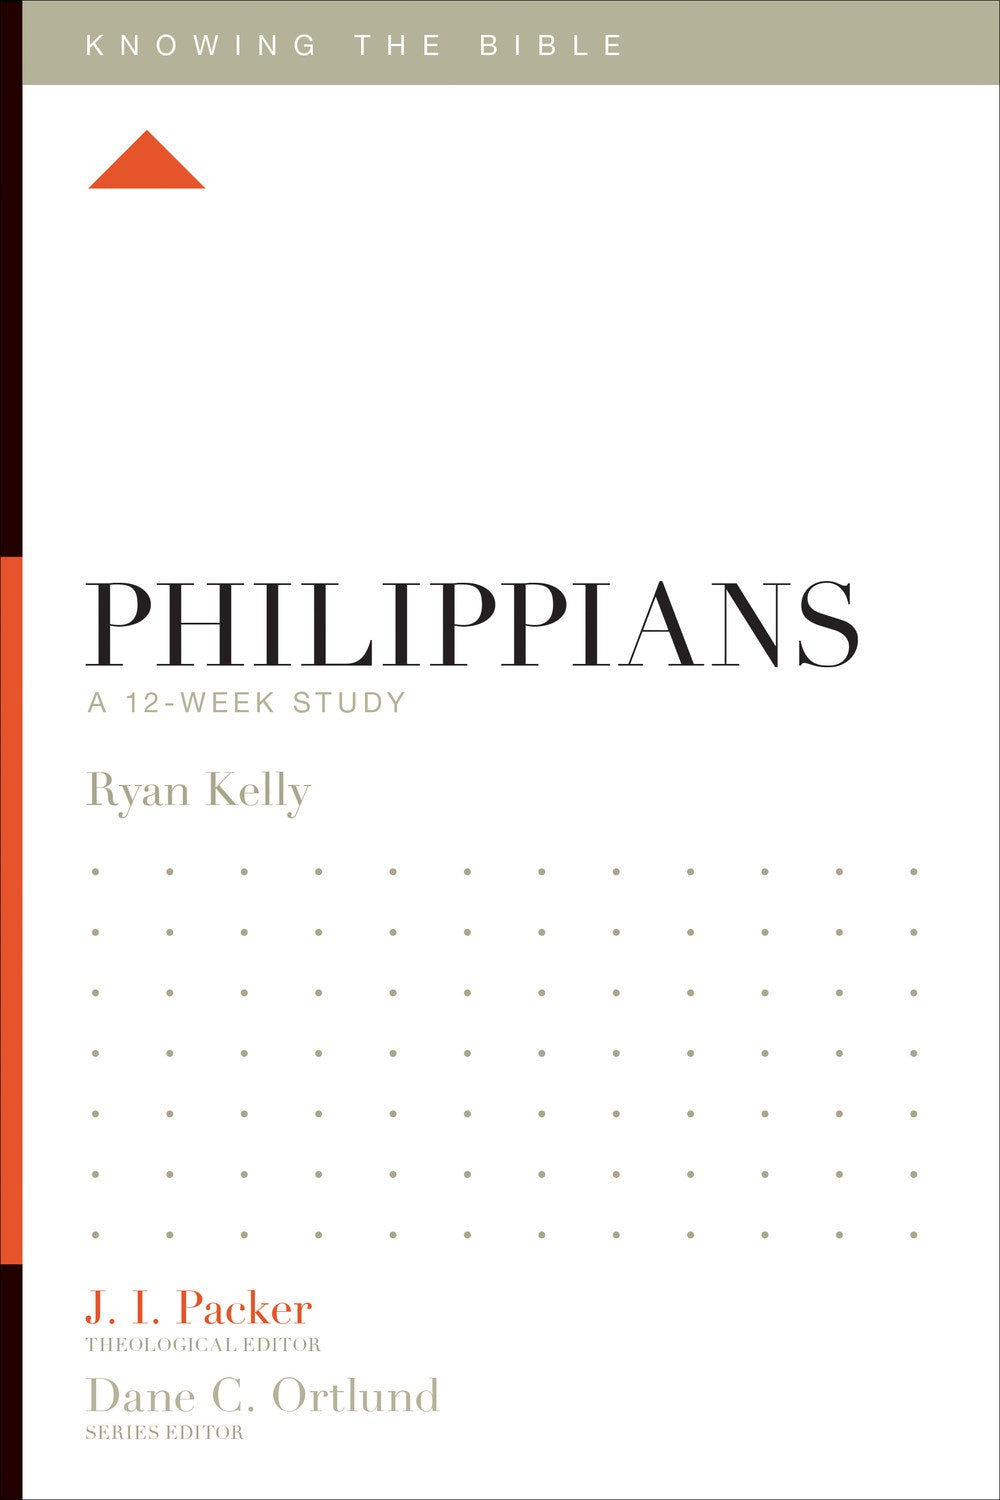 Philippians: A 12-Week Study (Knowing The Bible)